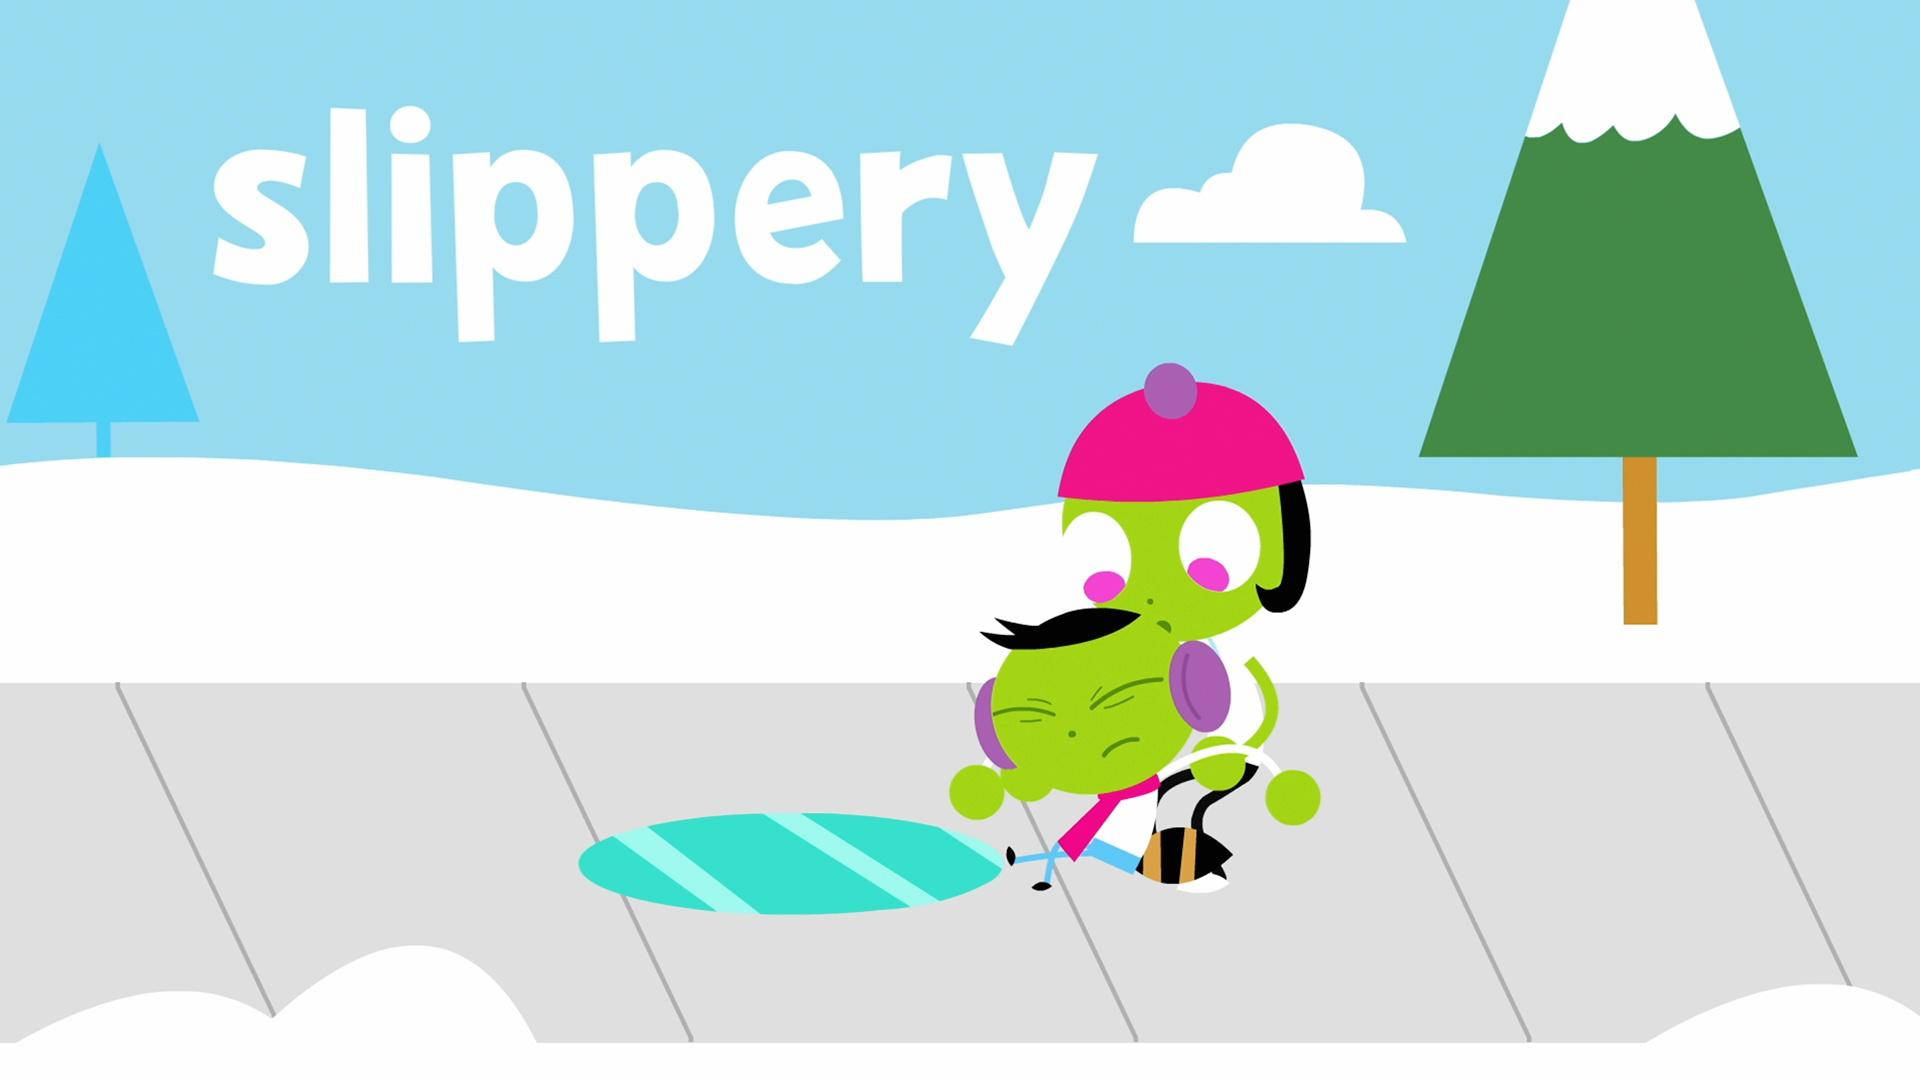 Pbs Kids Slippery Poster Background